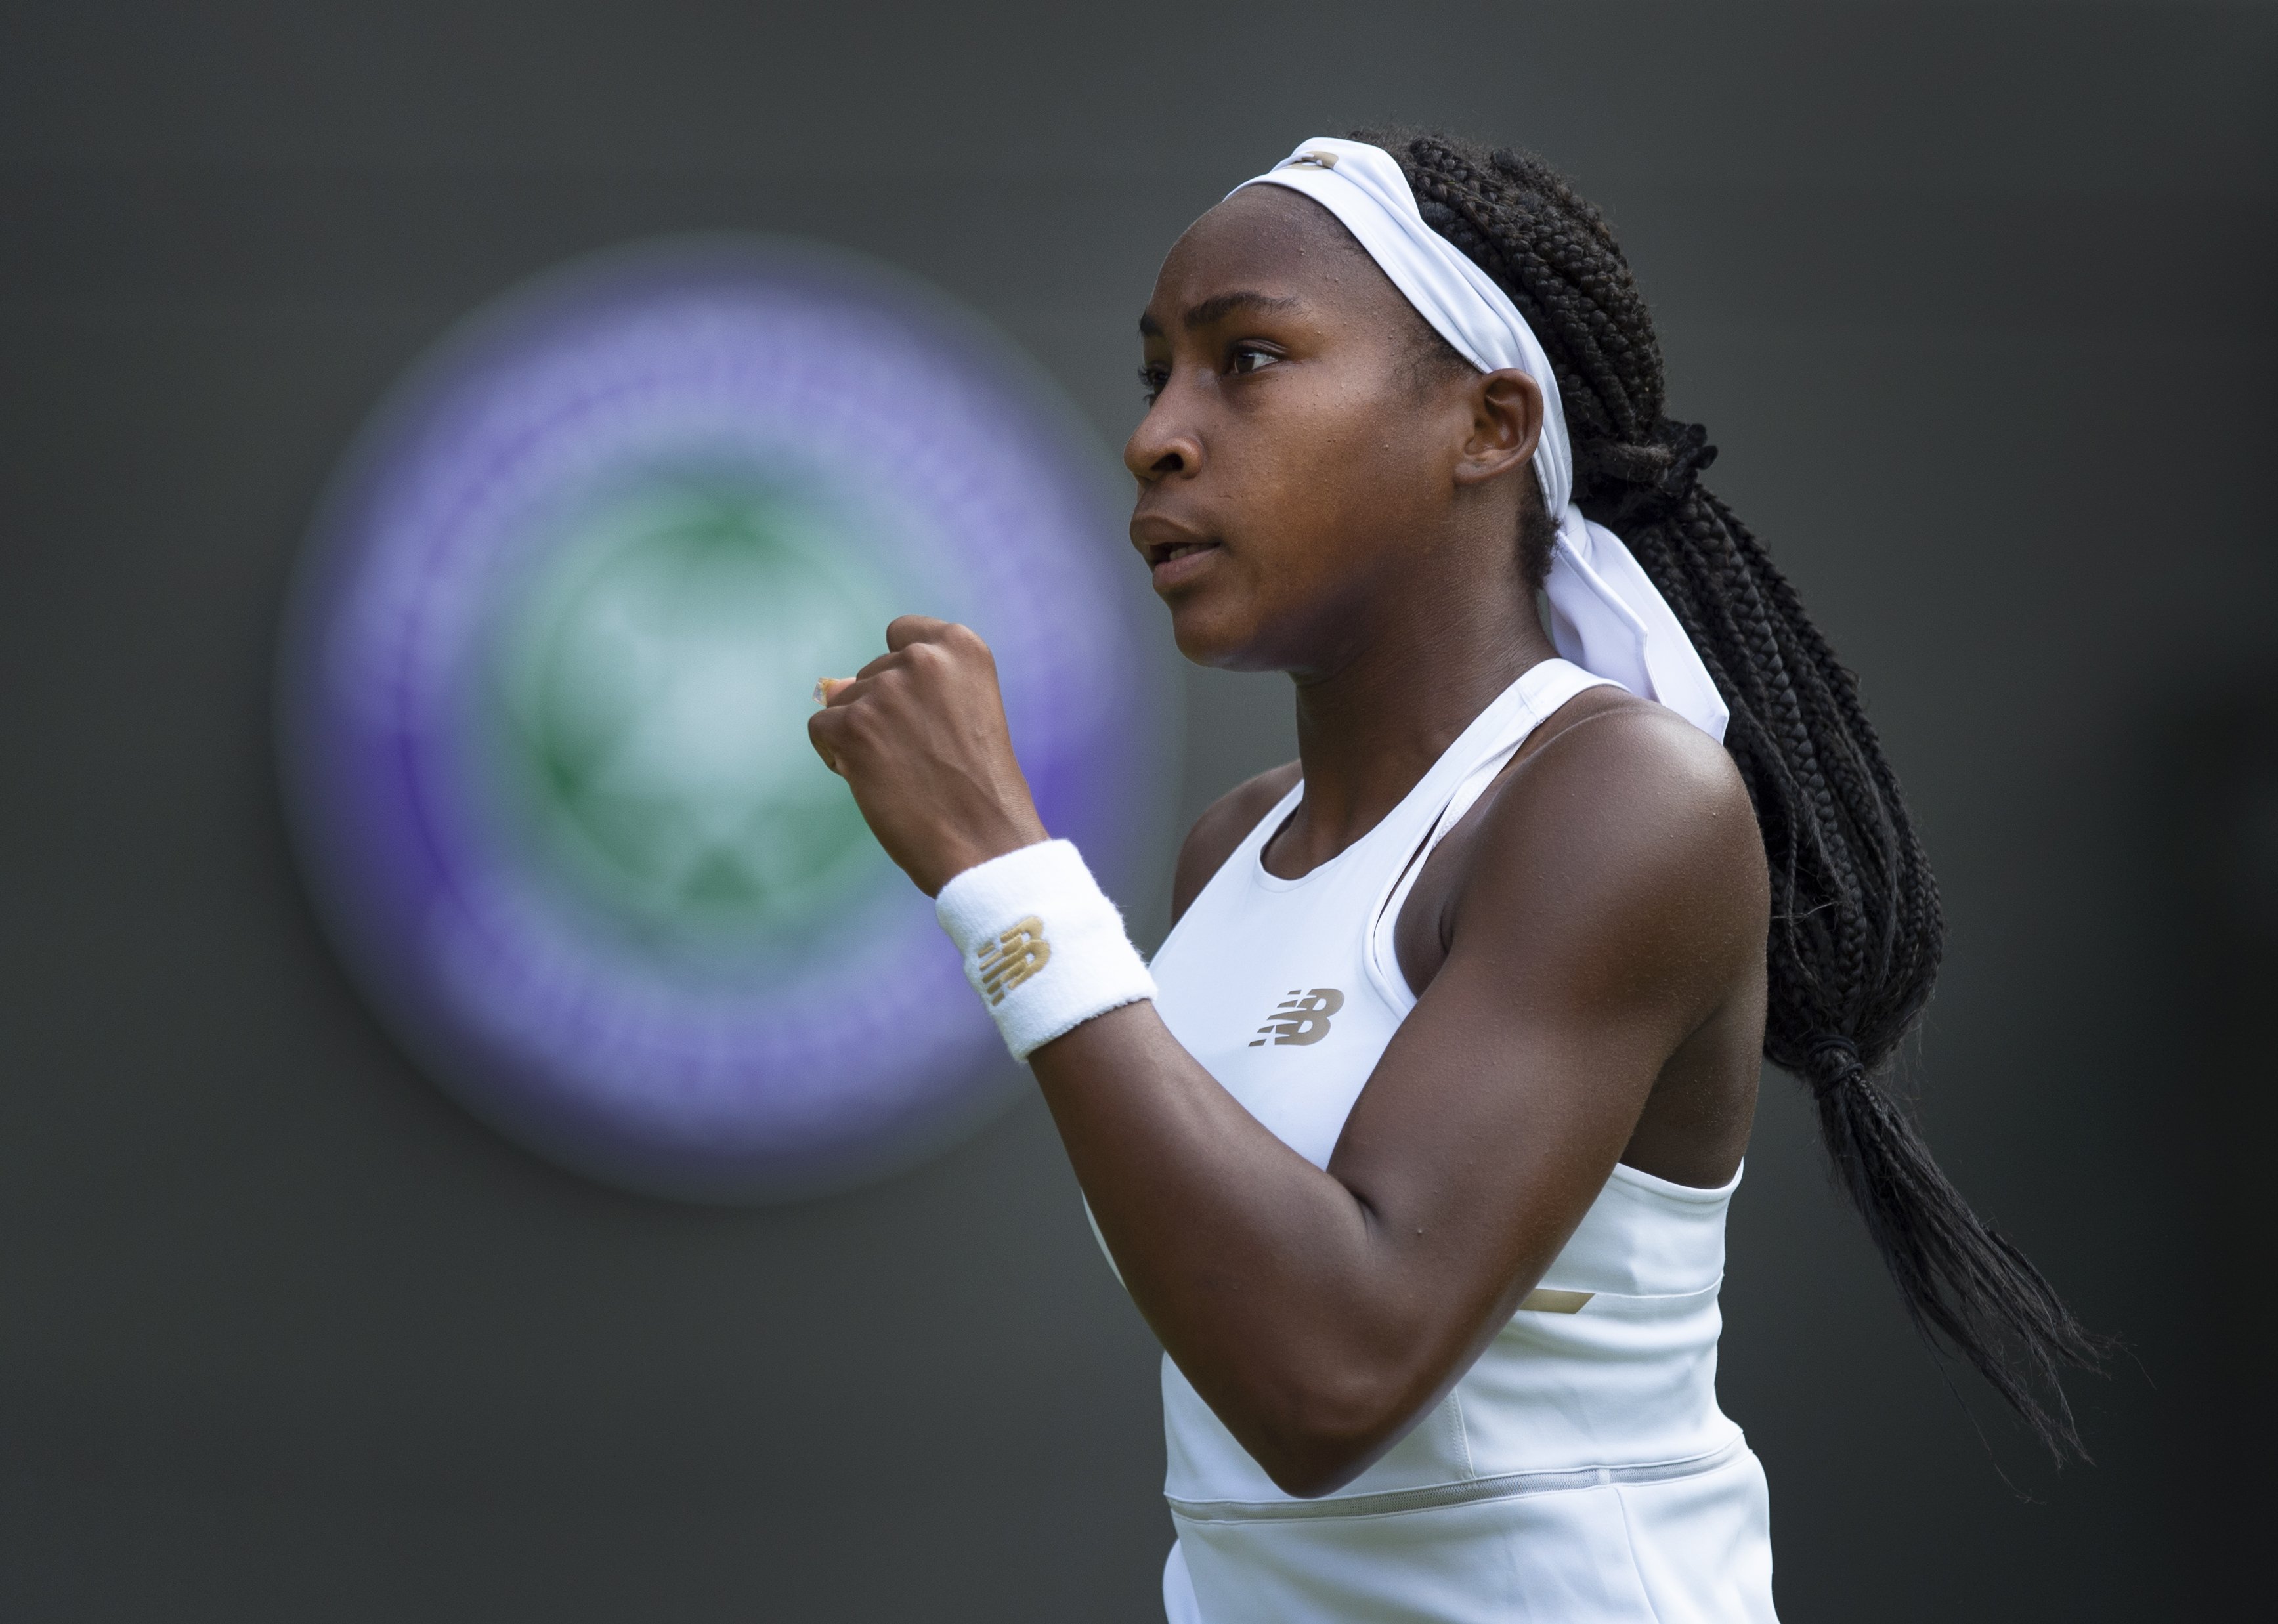 Cori Gauff playing against Venus Williams at Wimbledon 2019 in London, England on July 1, 2019. | Photo: Getty Images